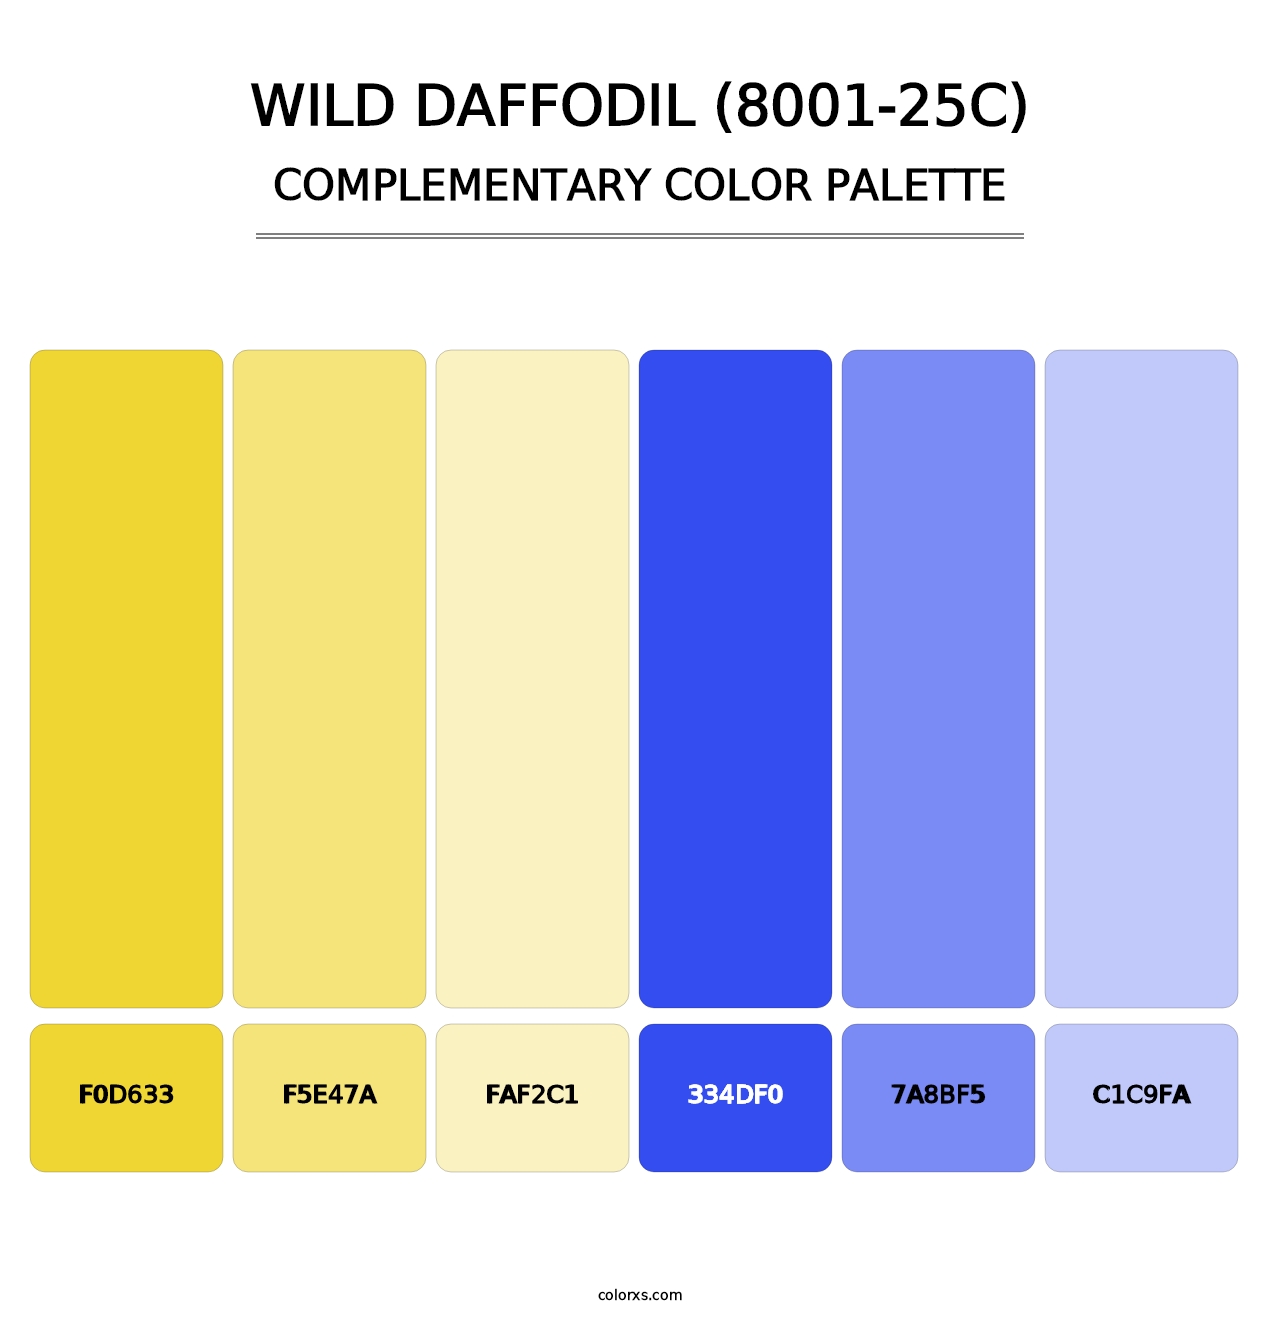 Wild Daffodil (8001-25C) - Complementary Color Palette